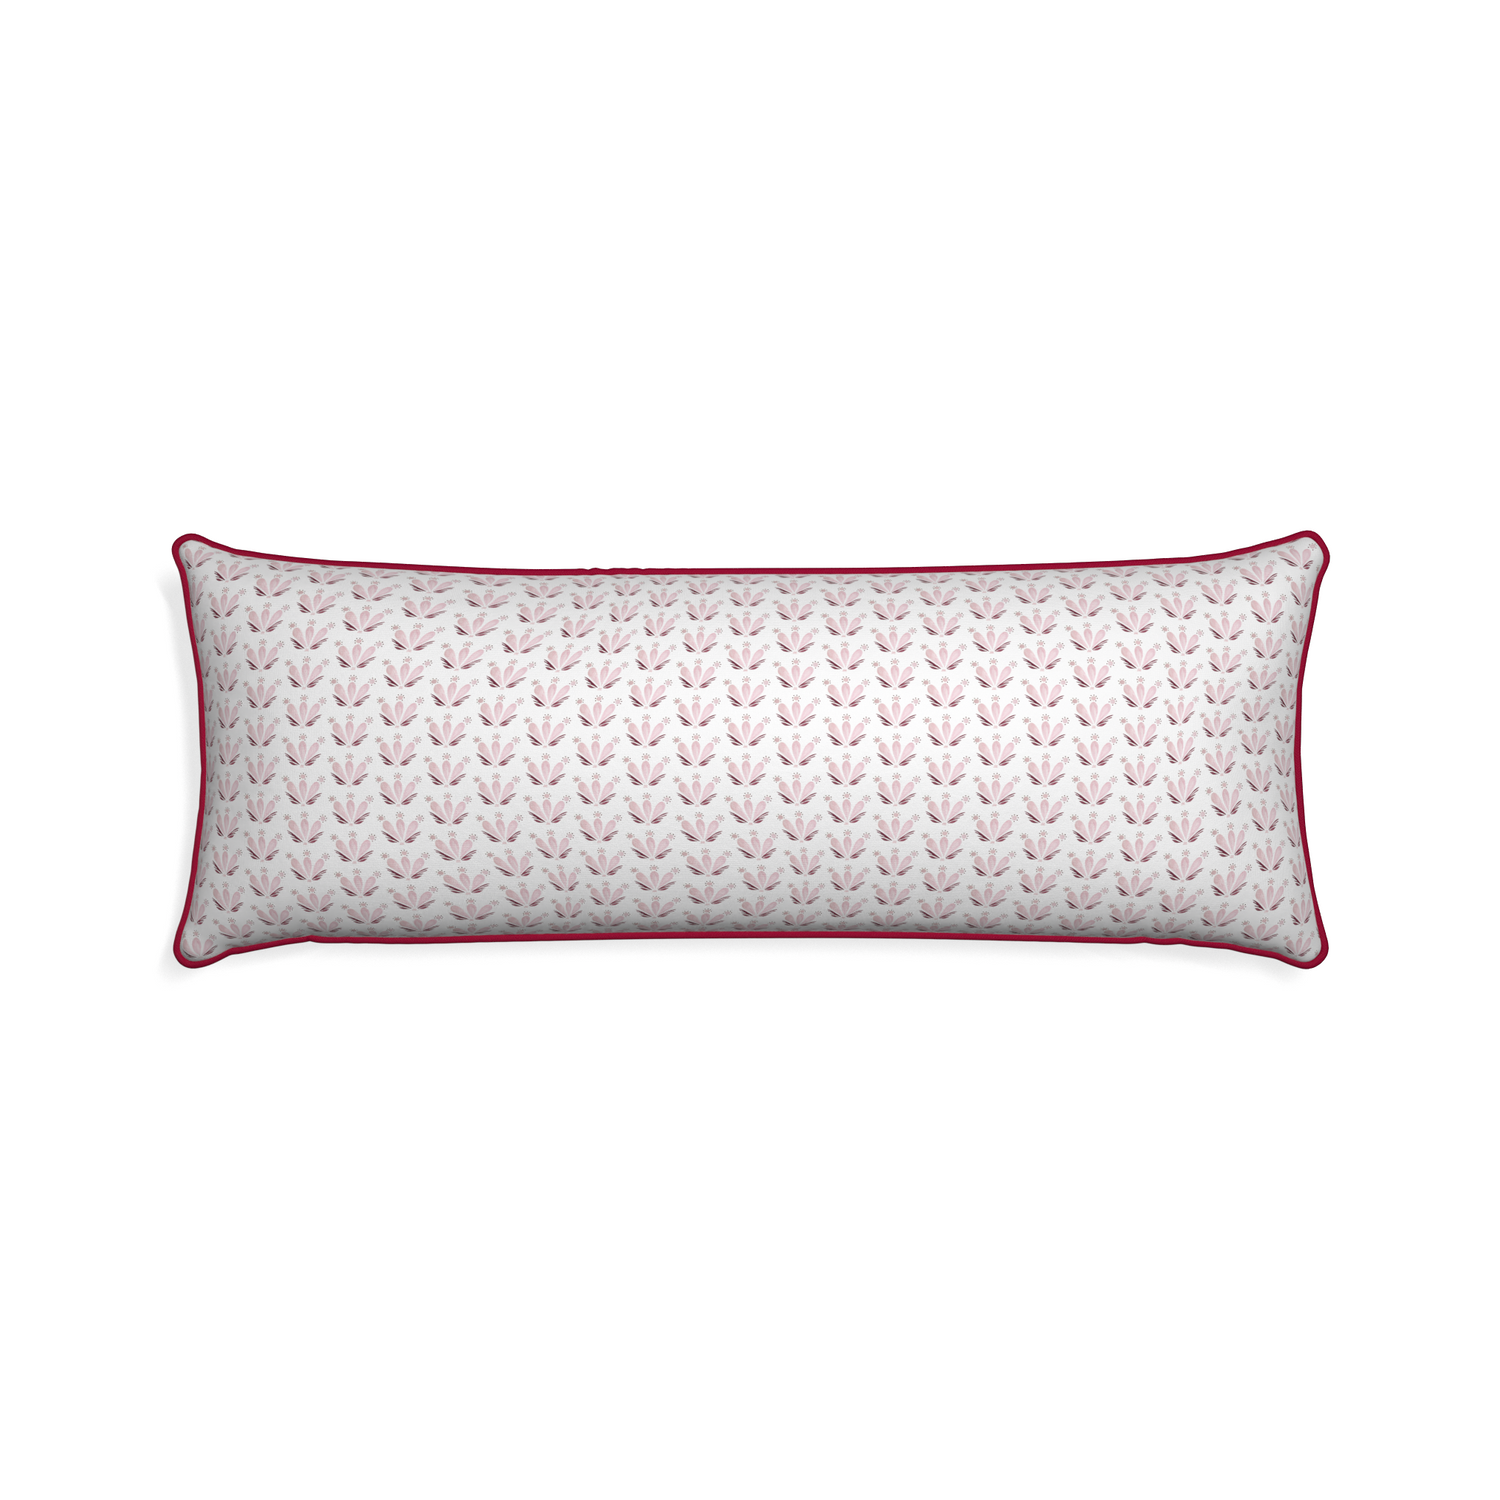 Xl-lumbar serena pink custom pink & burgundy drop repeat floralpillow with raspberry piping on white background